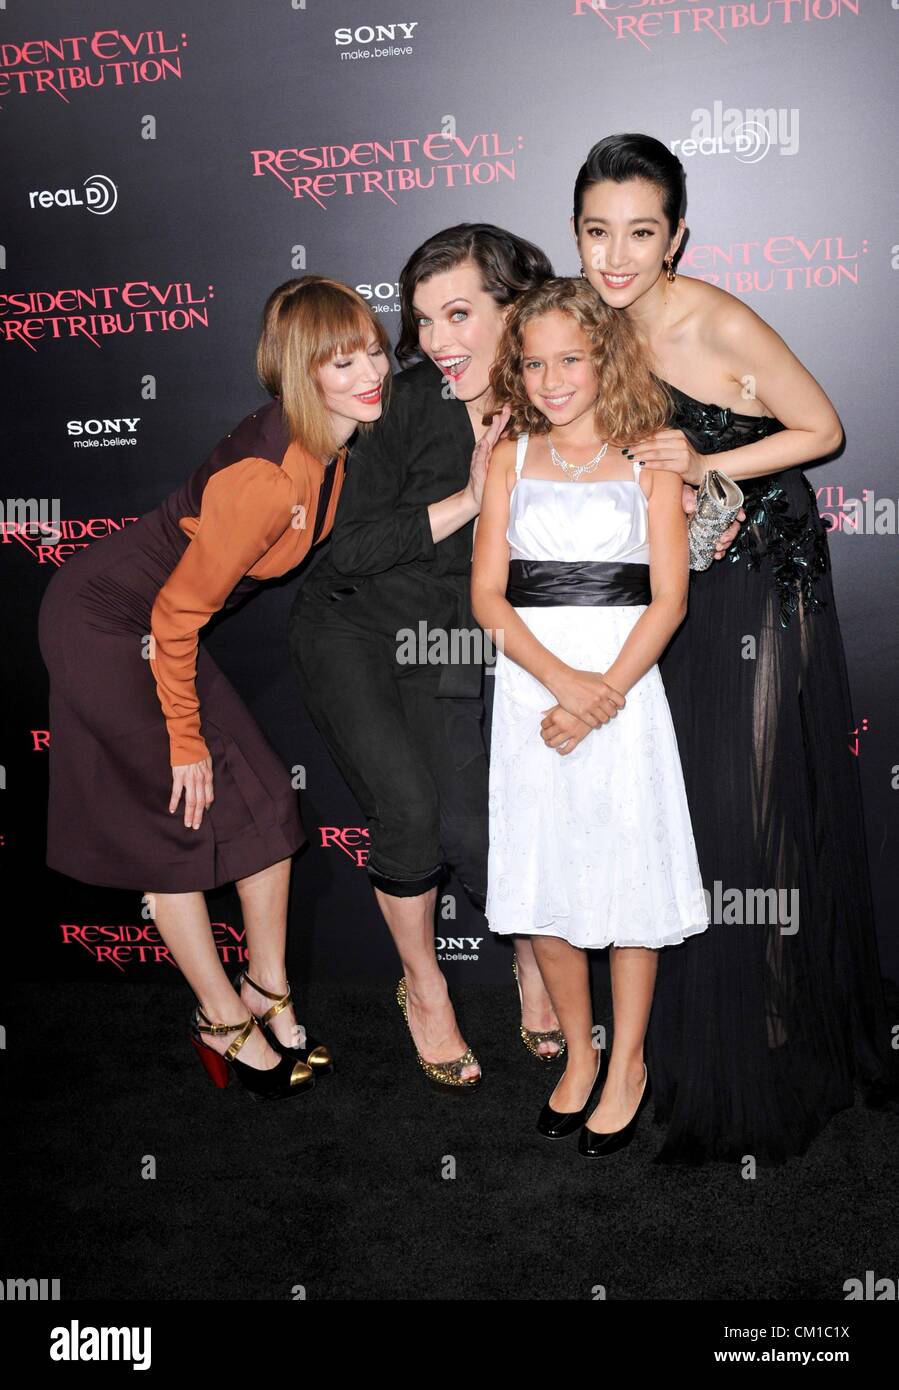 Los Angeles, USA. 12th September 2012. Sienna Guillory, Milla Jovovich, Li Bingbing, Aryana Engineer at arrivals for RESIDENT EVIL: RETRIBUTION Premiere, Regal Cinemas L.A. Live, Los Angeles, CA September 12, 2012. Photo By: Elizabeth Goodenough/Everett Collection Stock Photo